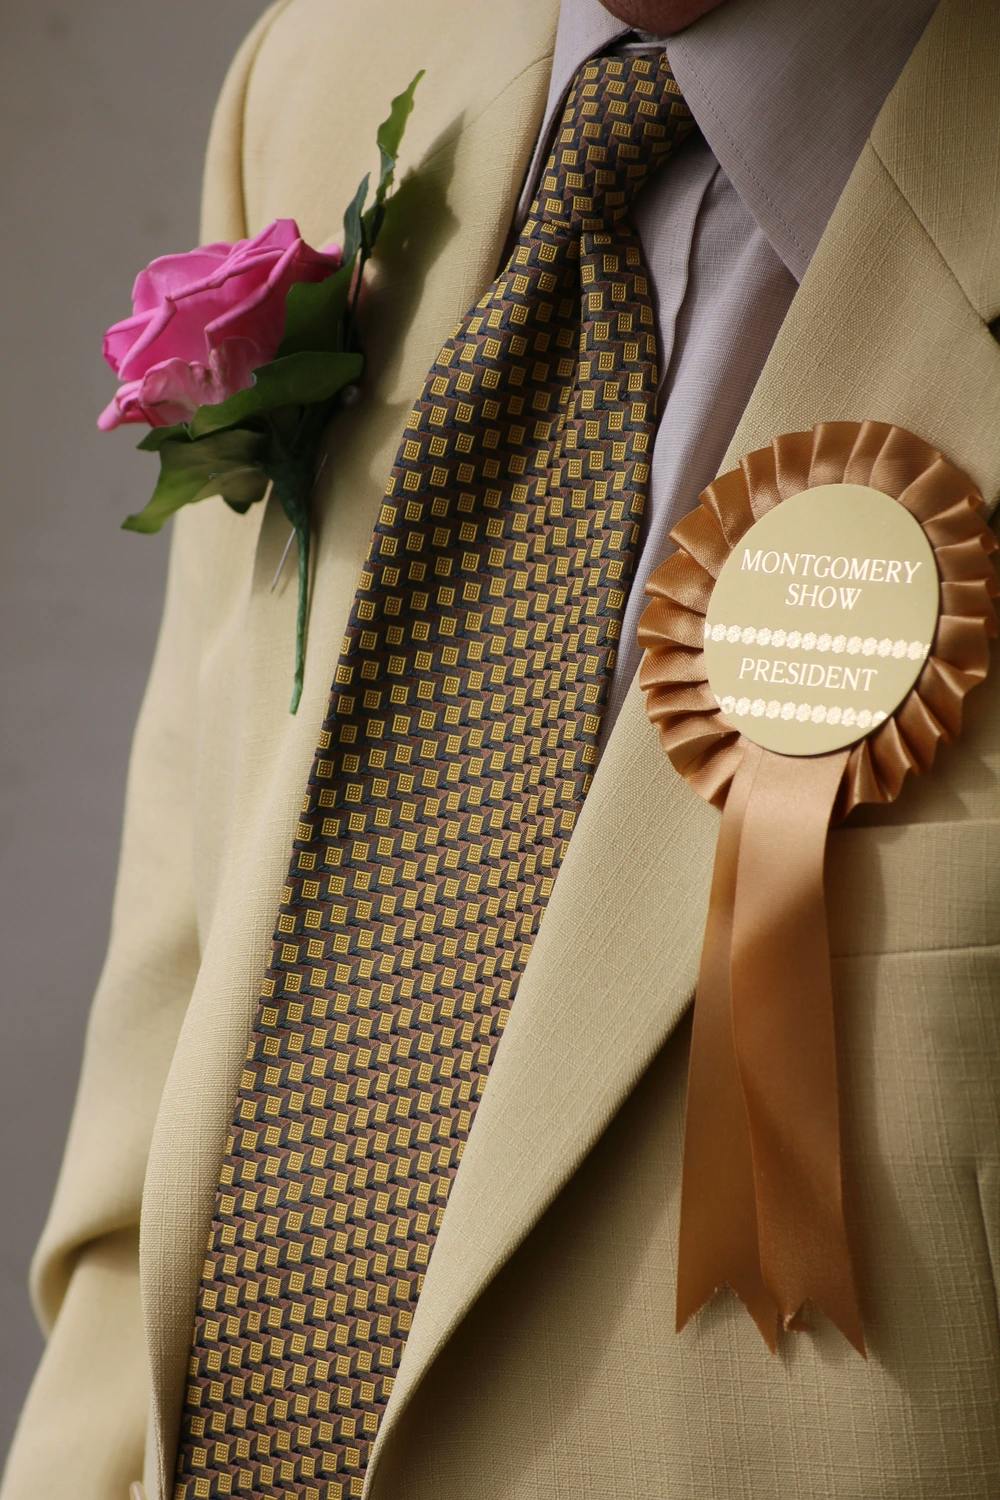 Older man wearing rosette showing he is a country show president